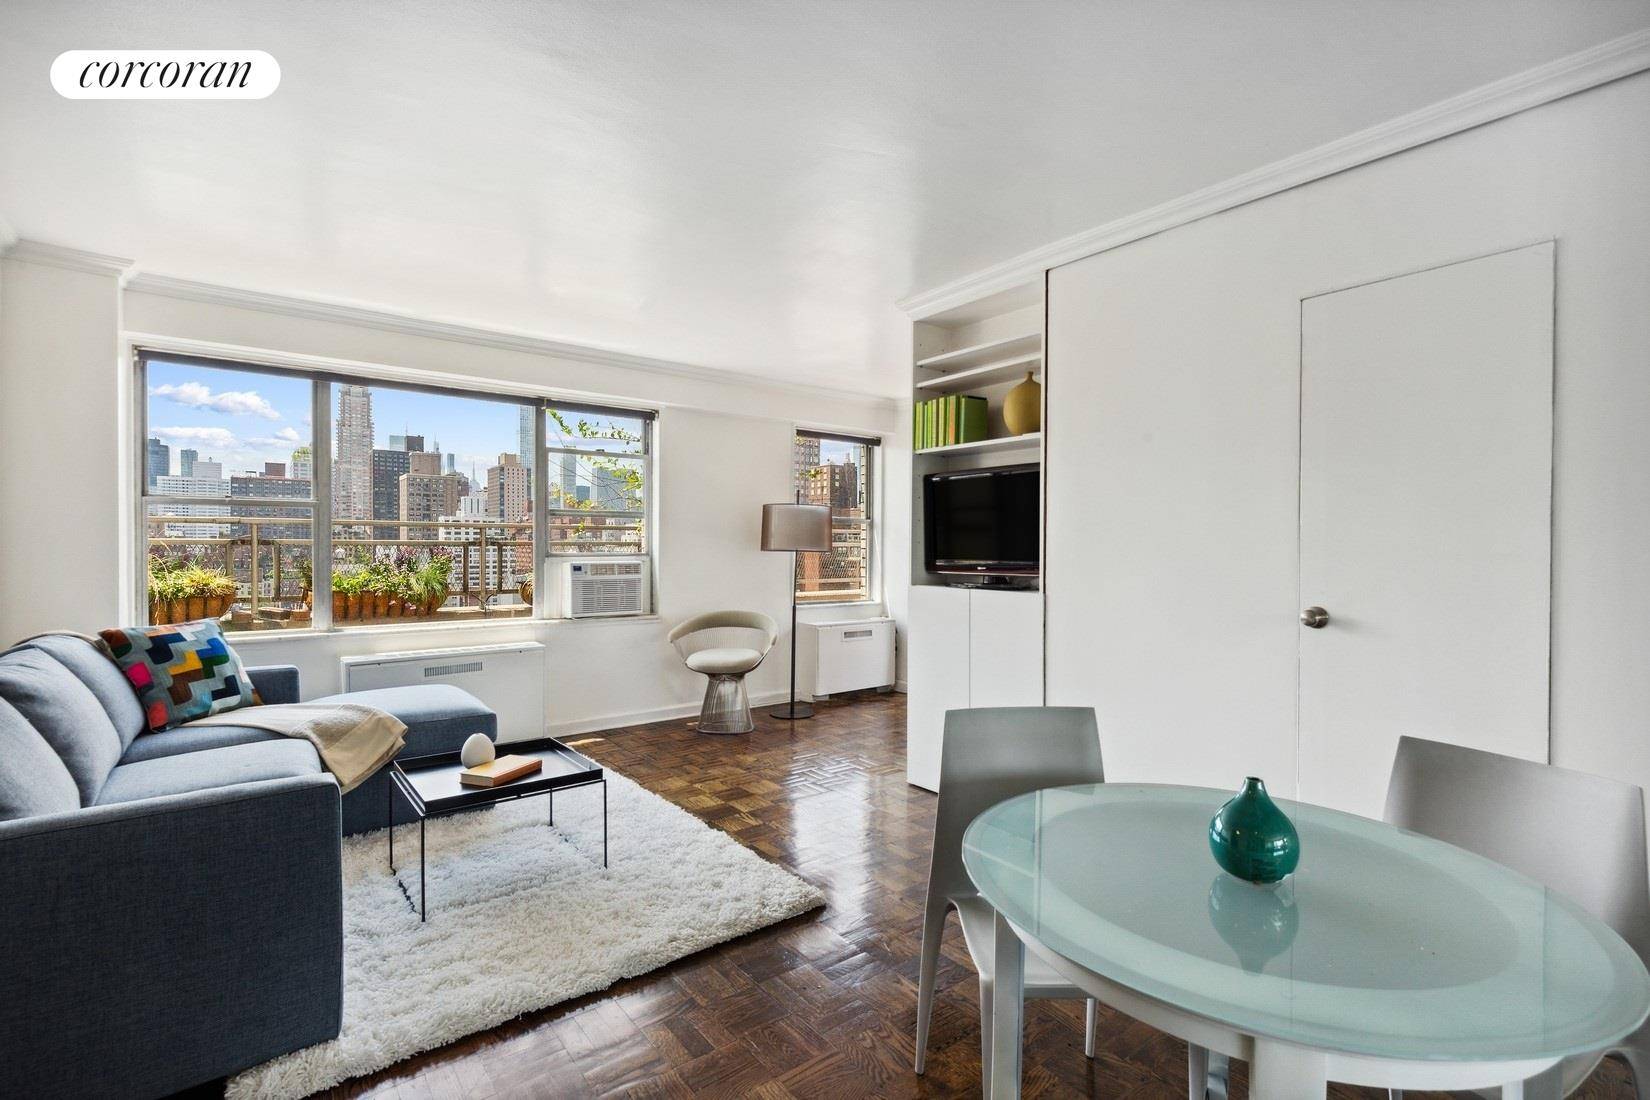 BACK ! This is an incredible opportunity for a Studio Buyer who wants a larger, private outdoor space with views.